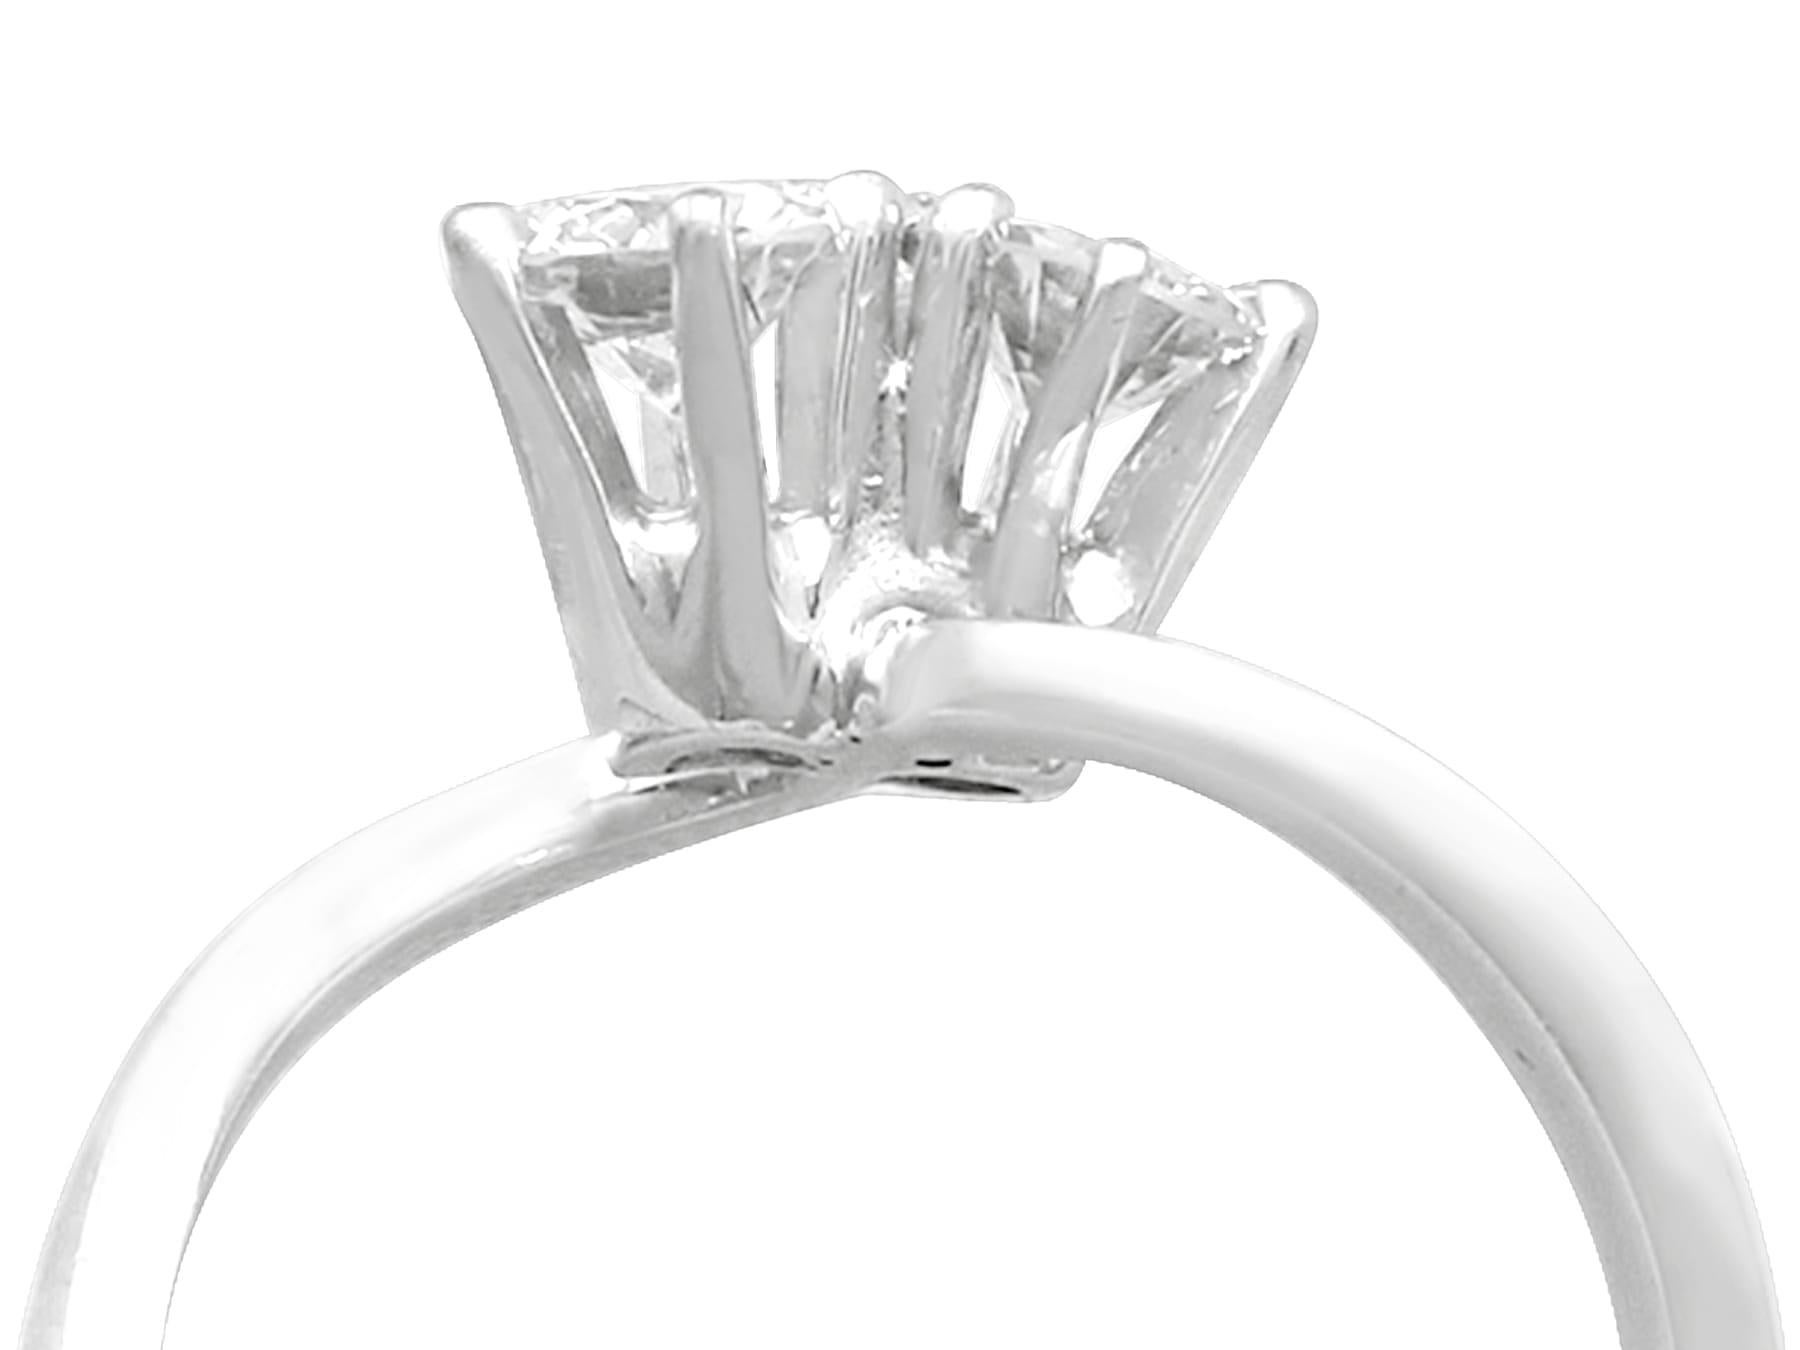 A fine and impressive vintage 0.50 carat diamond twist ring in 18 karat white gold; part of our 1960s jewelry and estate jewelry collections.

This fine and impressive 1960s diamond twist ring has been crafted in 18k white gold.

The pierced